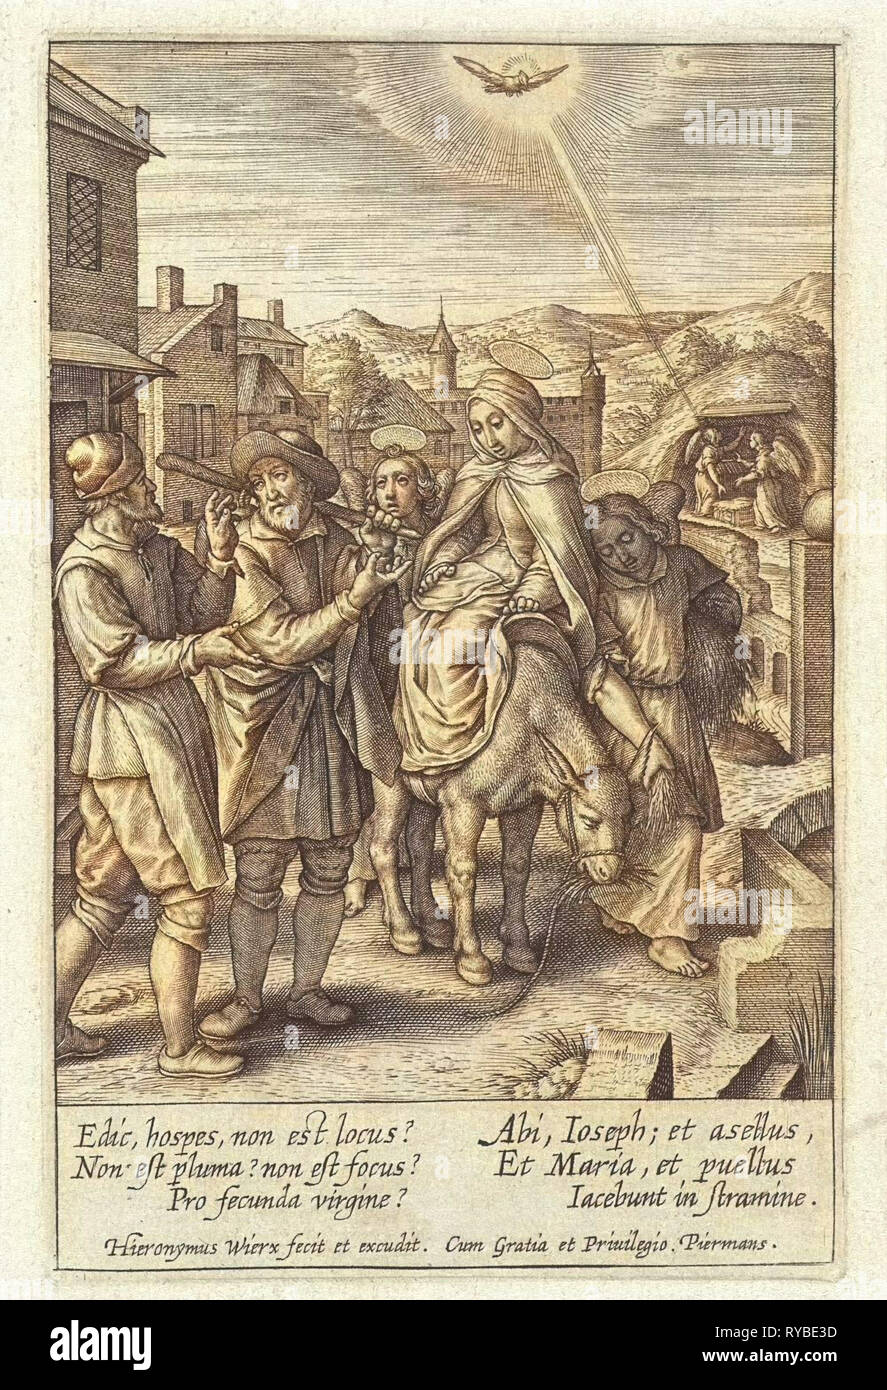 Joseph and Mary are refused at the inn, print maker: Hieronymus Wierix, 1563 - before 1619 Stock Photo